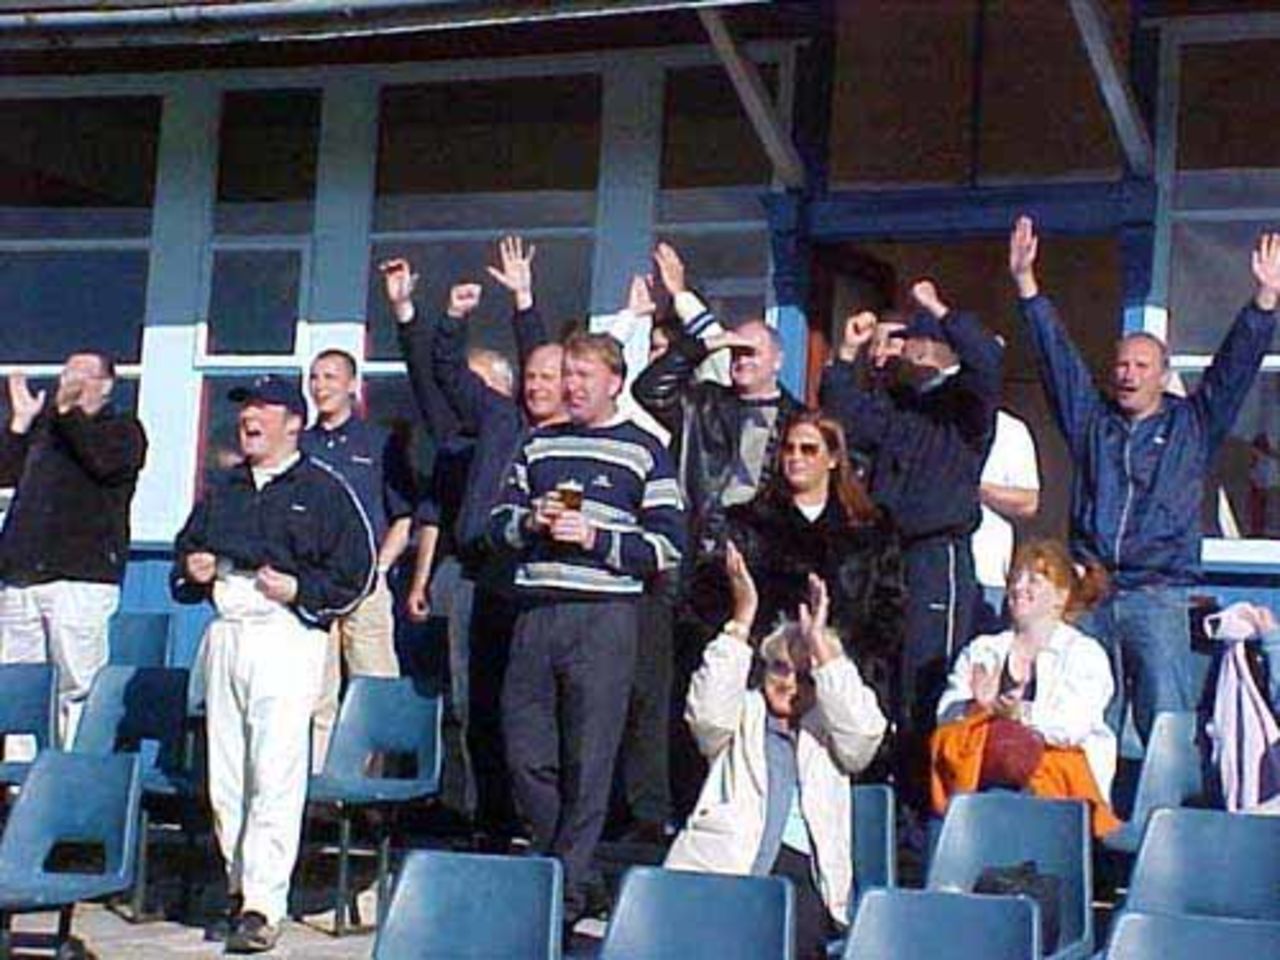 The Bacup supporters cheer the winning hit